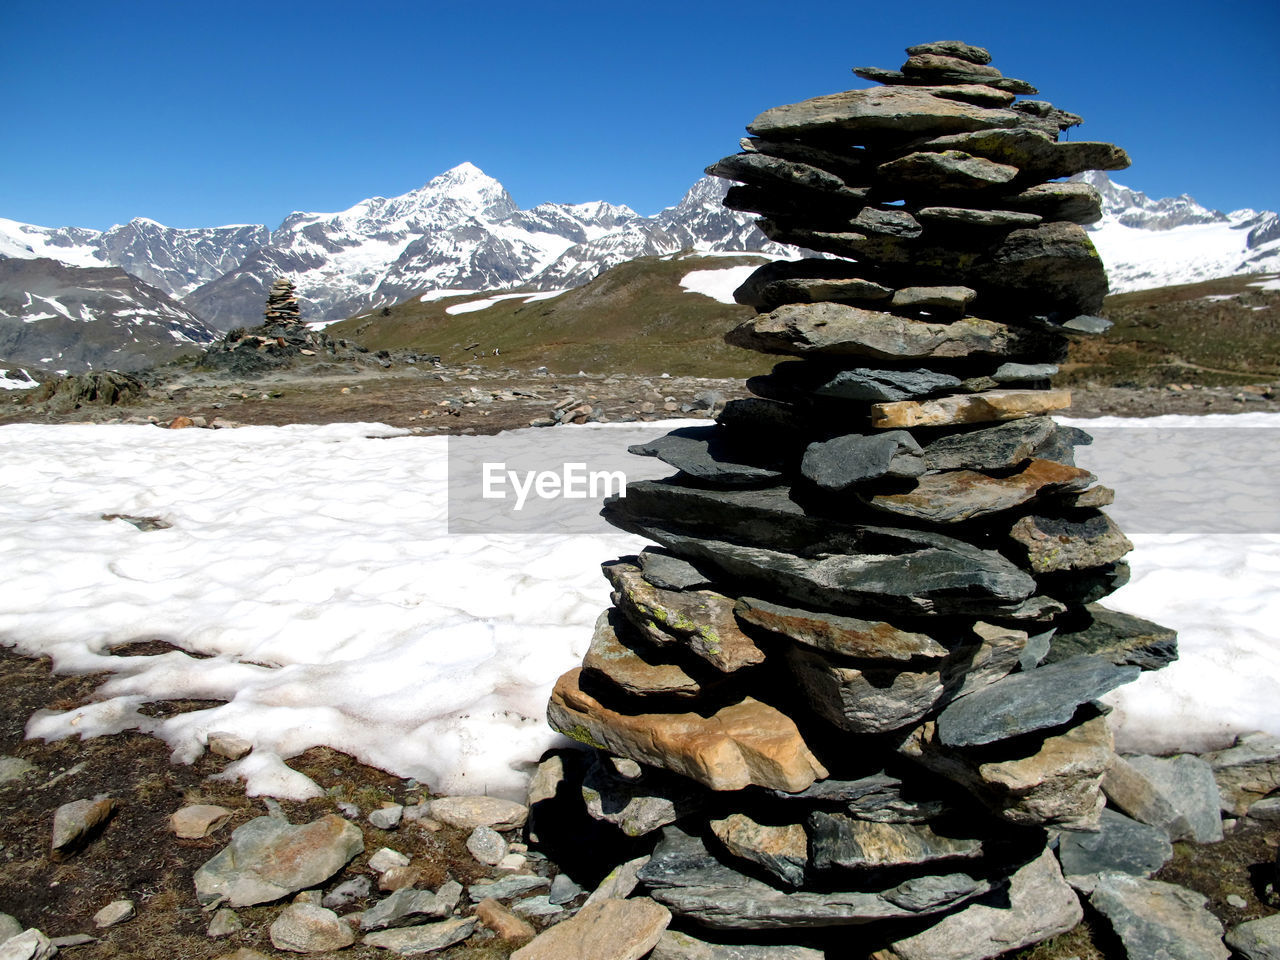 STACK OF ROCKS ON SNOW COVERED MOUNTAIN